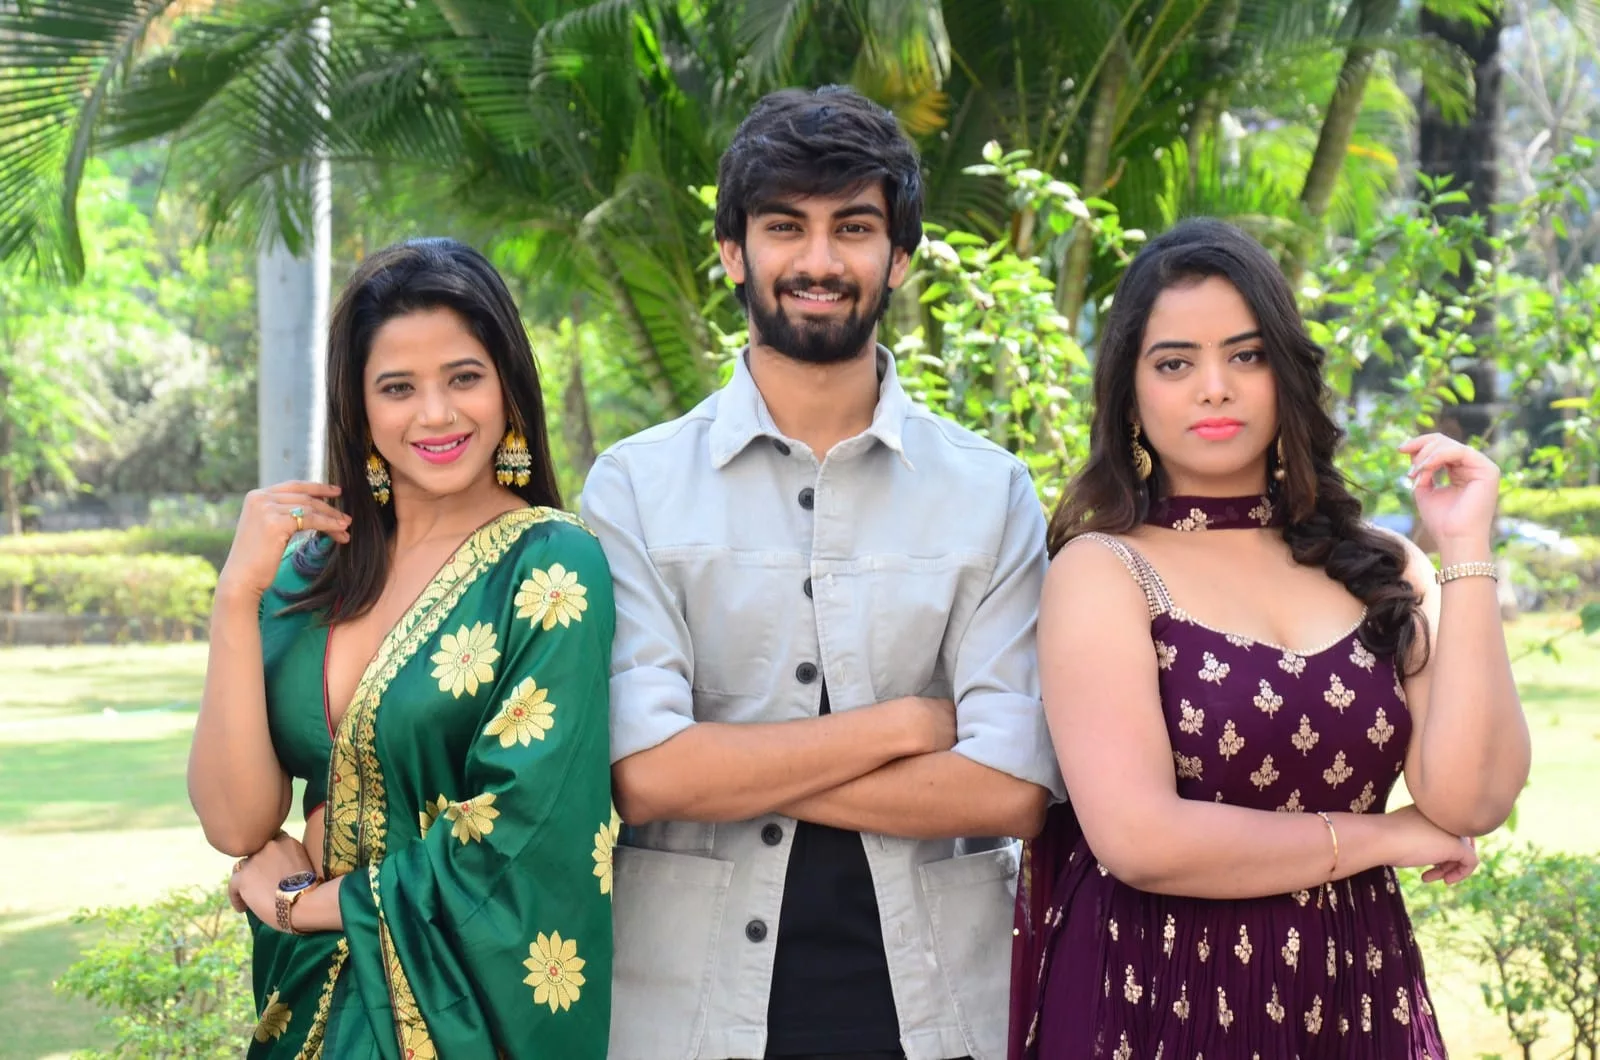 Hero Ram Karthik released the trailer of the youthful entertainer Chicklets